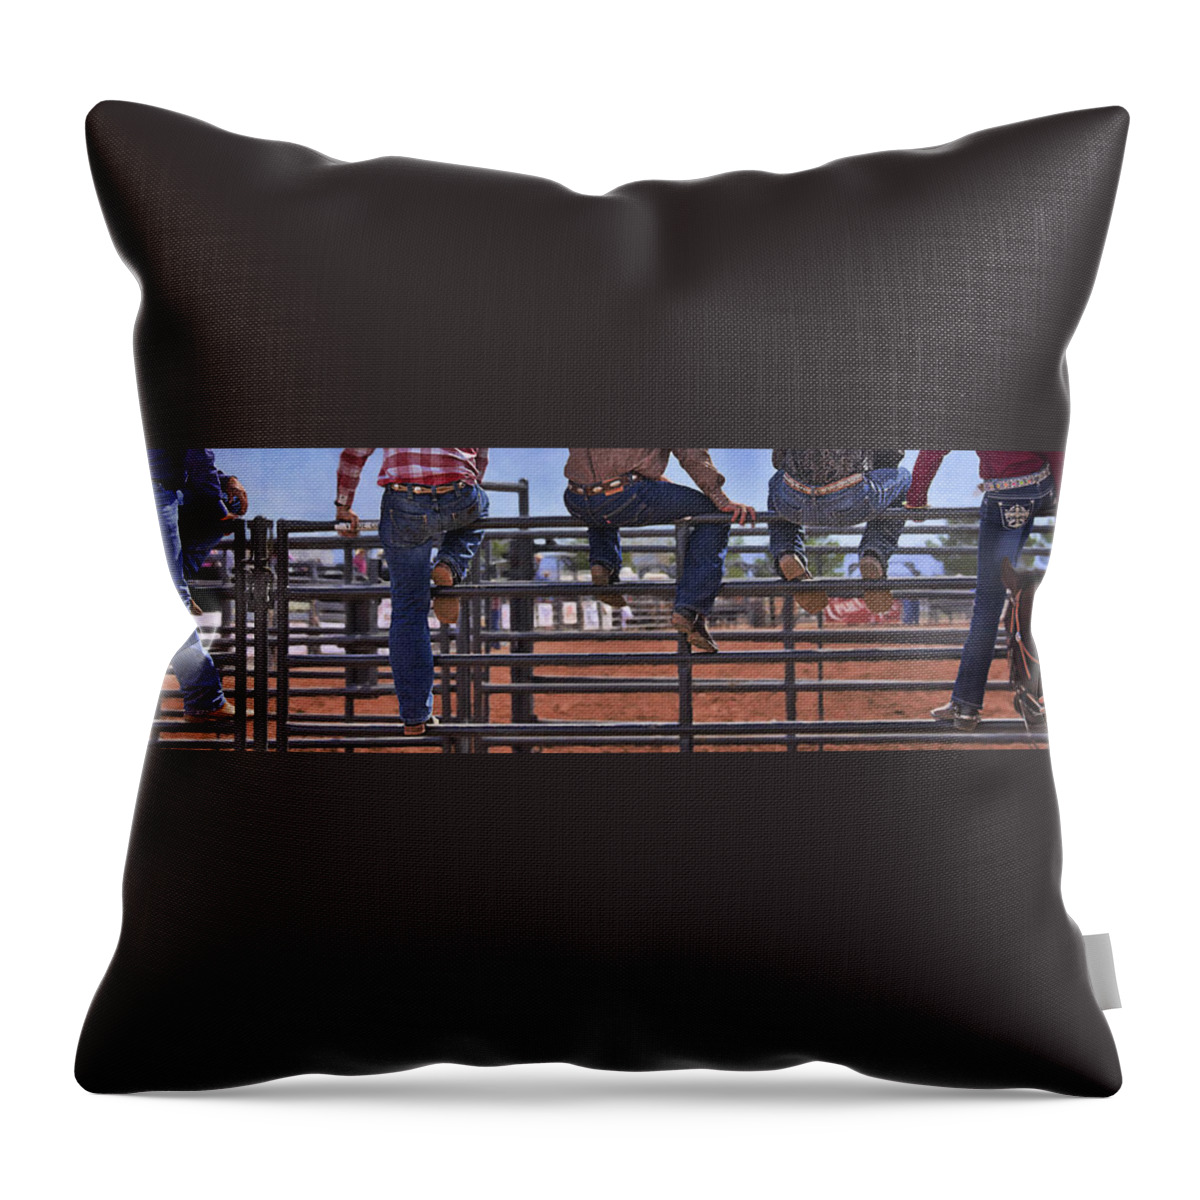 Rodeo Throw Pillow featuring the photograph Rodeo Fence Sitters by Priscilla Burgers